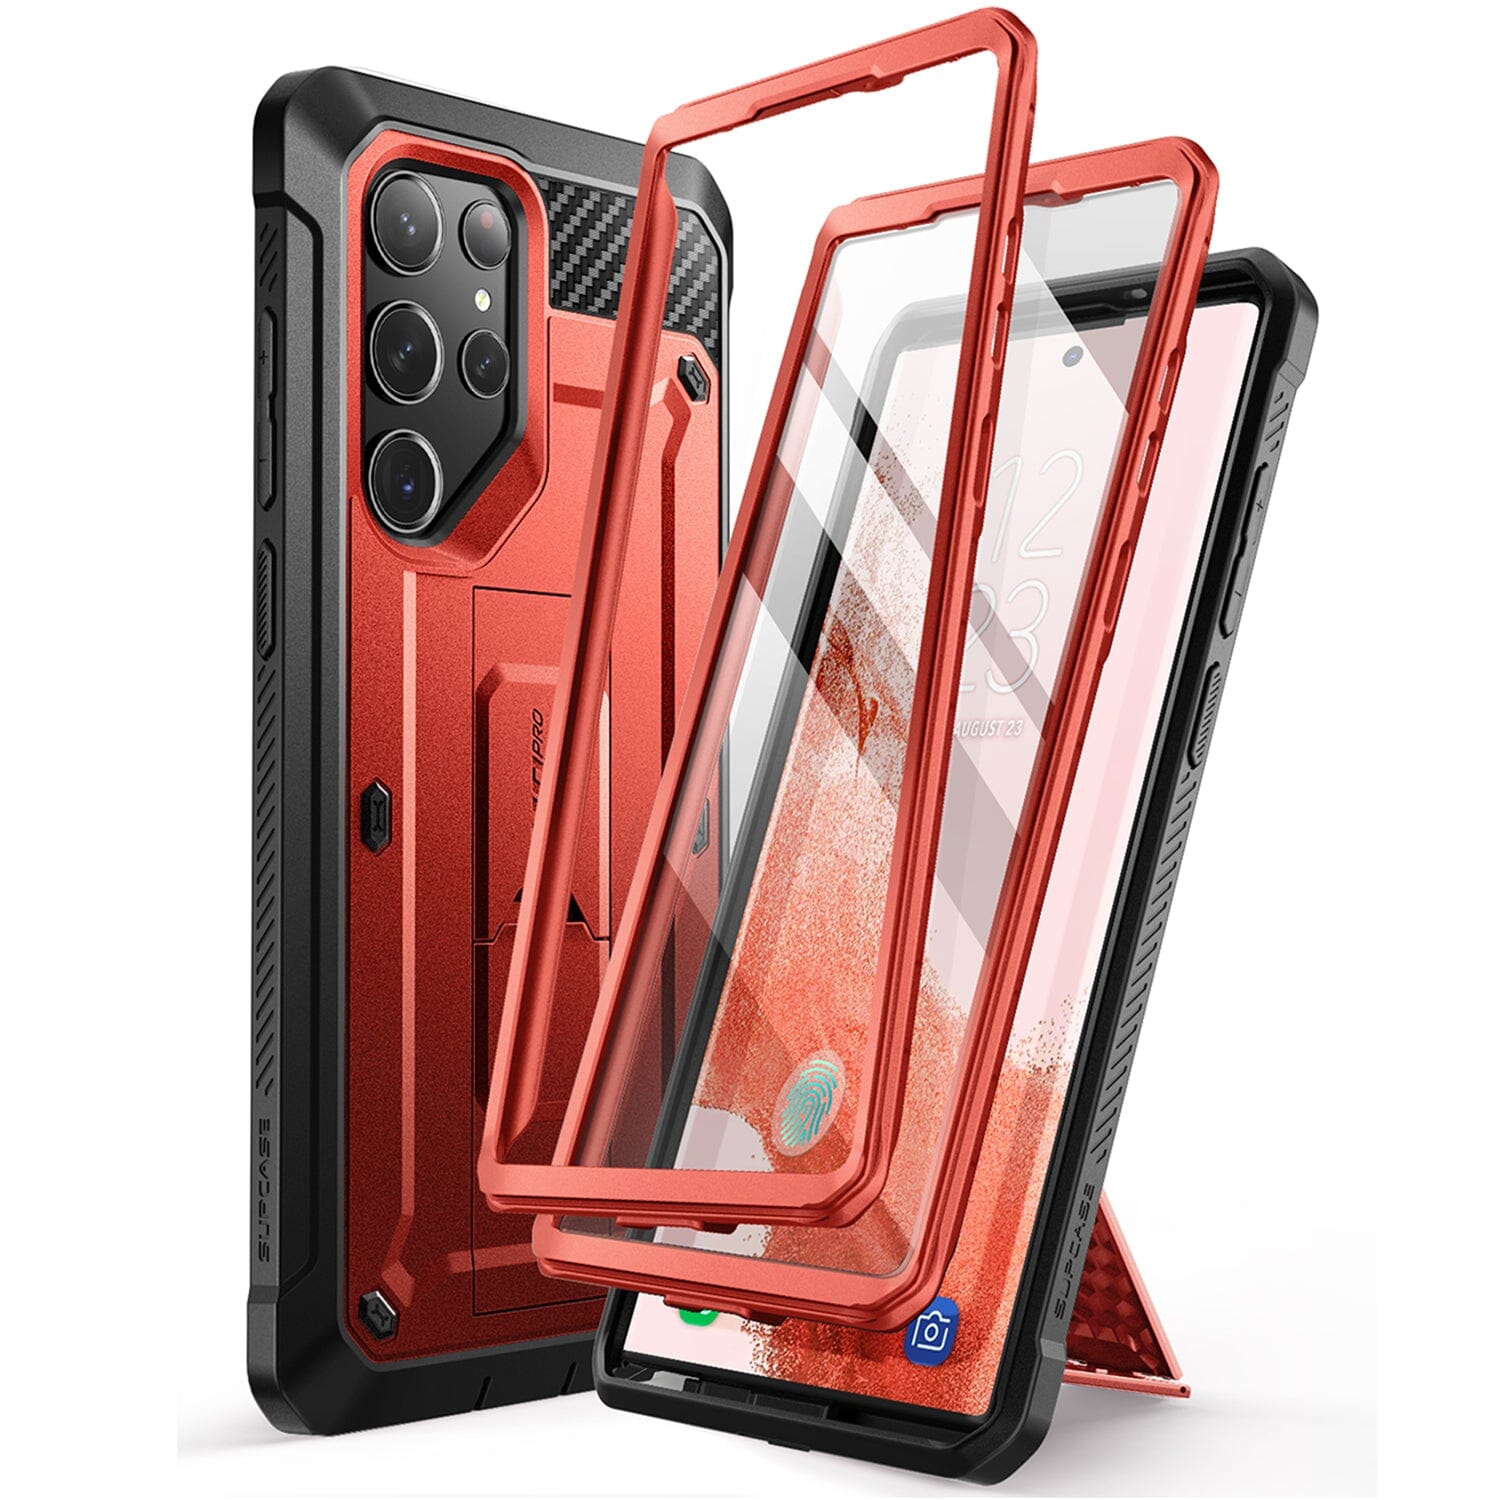 SUPCASE Unicorn Beetle Pro Case for Samsung Galaxy S23 Ultra 5G (2023 Release), [Extra Front Frame] Full-Body Dual Layer Rugged Belt-Clip & Kickstand Case with Built-in Screen Protector ONE2WORLD 